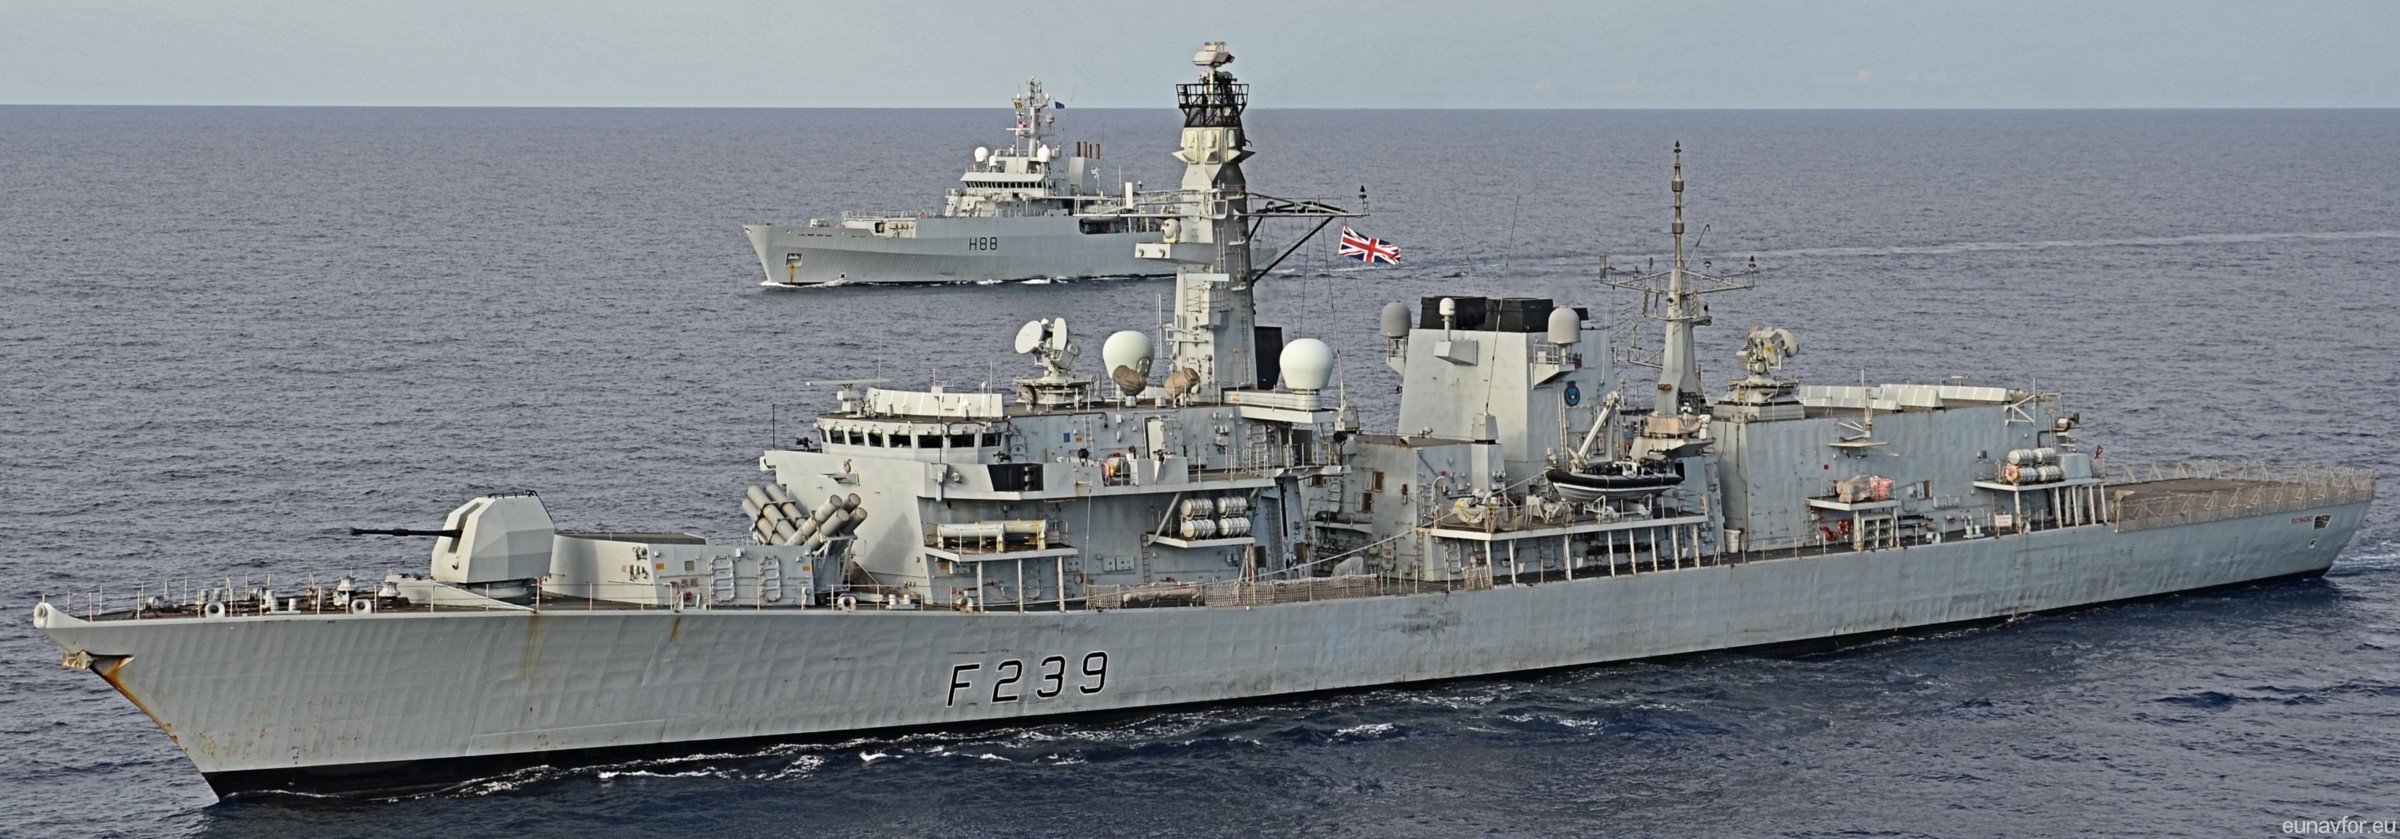 f-239 hms richmond type 23 duke class guided missile frigate ffg royal navy 41